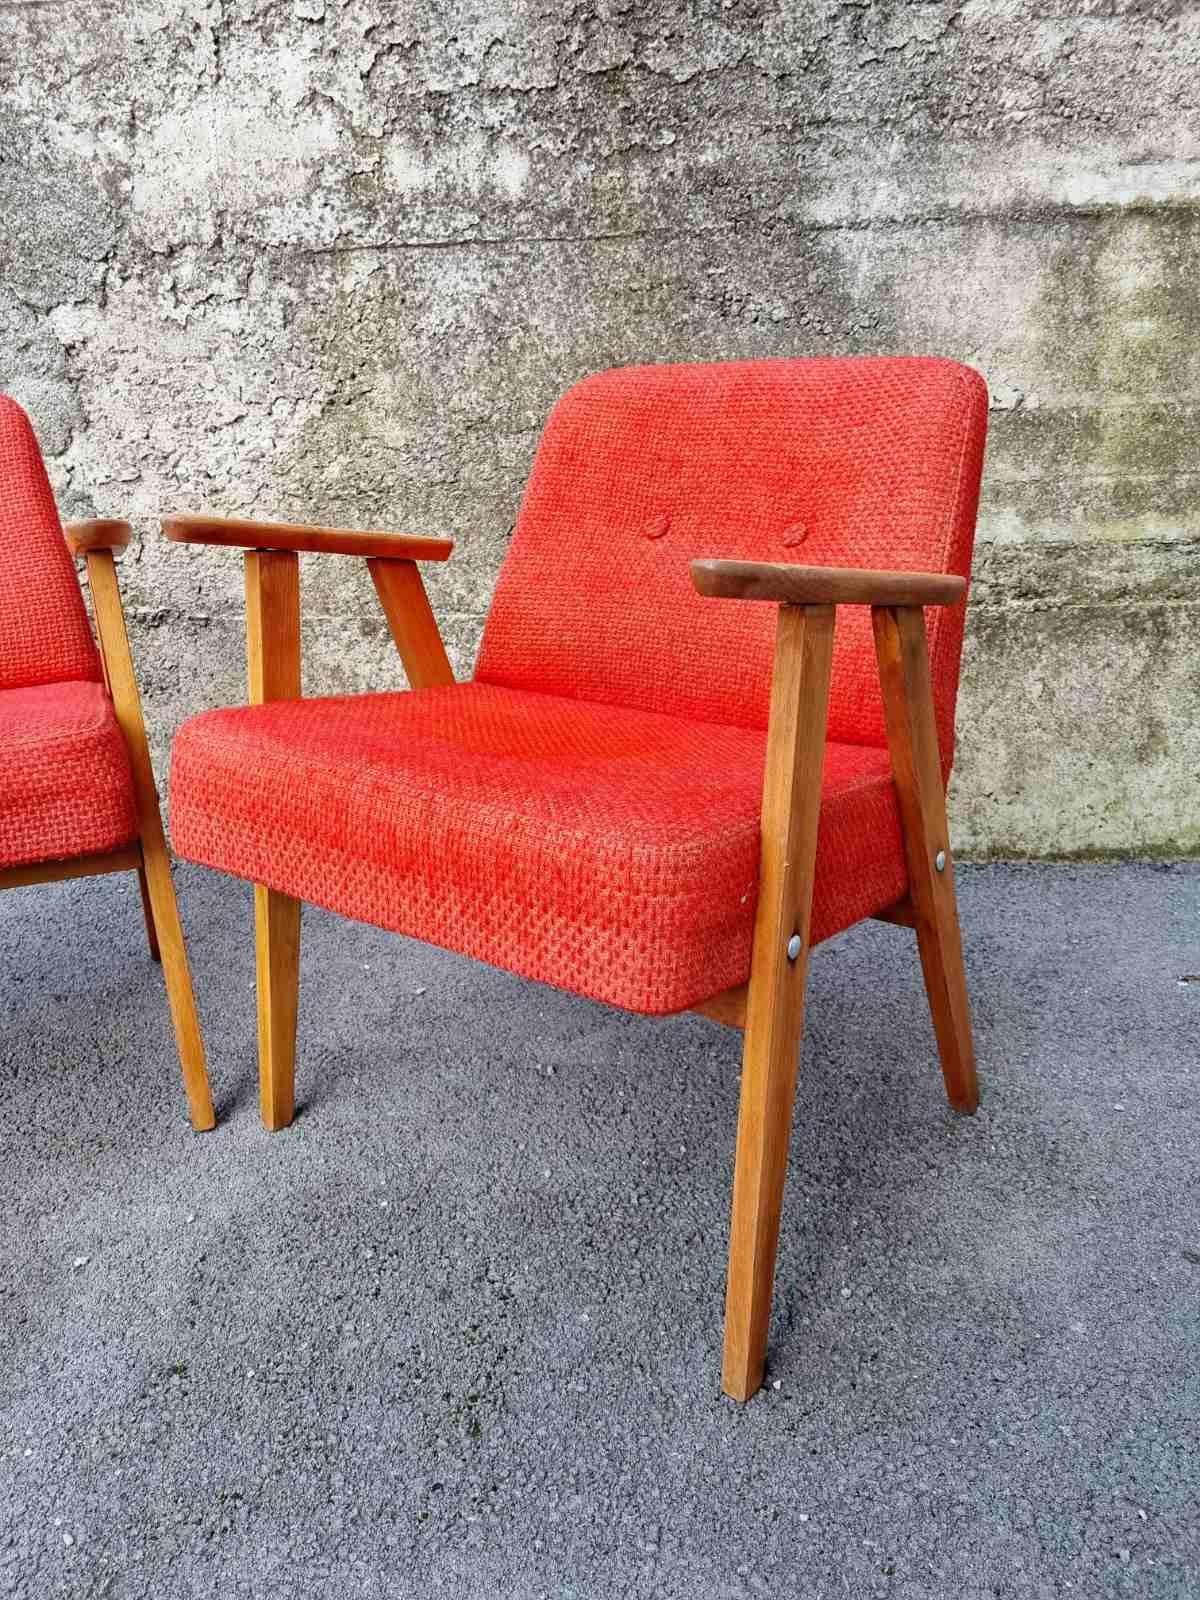 Mid-20th Century Pair of Midcentury Polish Armchairs, Model 366, Design by Jozef Chierowski 60s For Sale